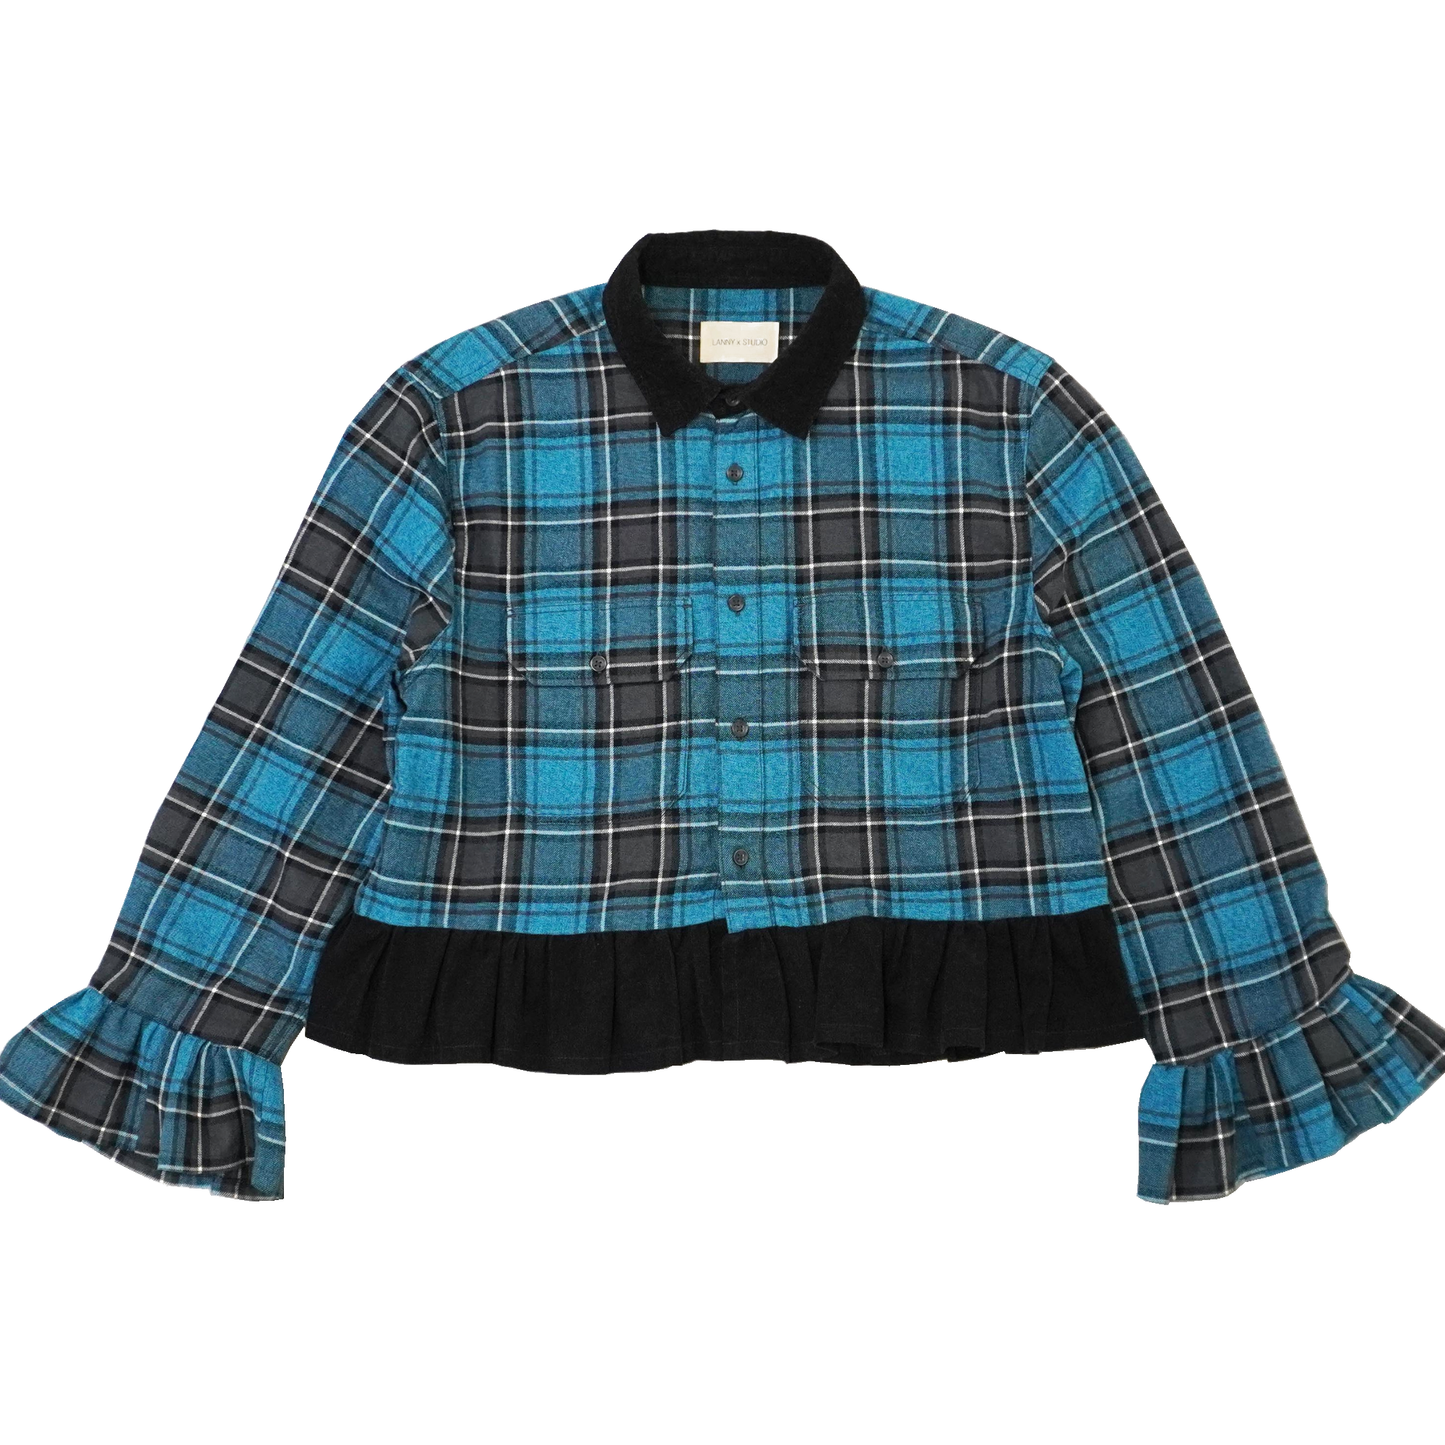 Teal Check with Black Ruffle Overshirt